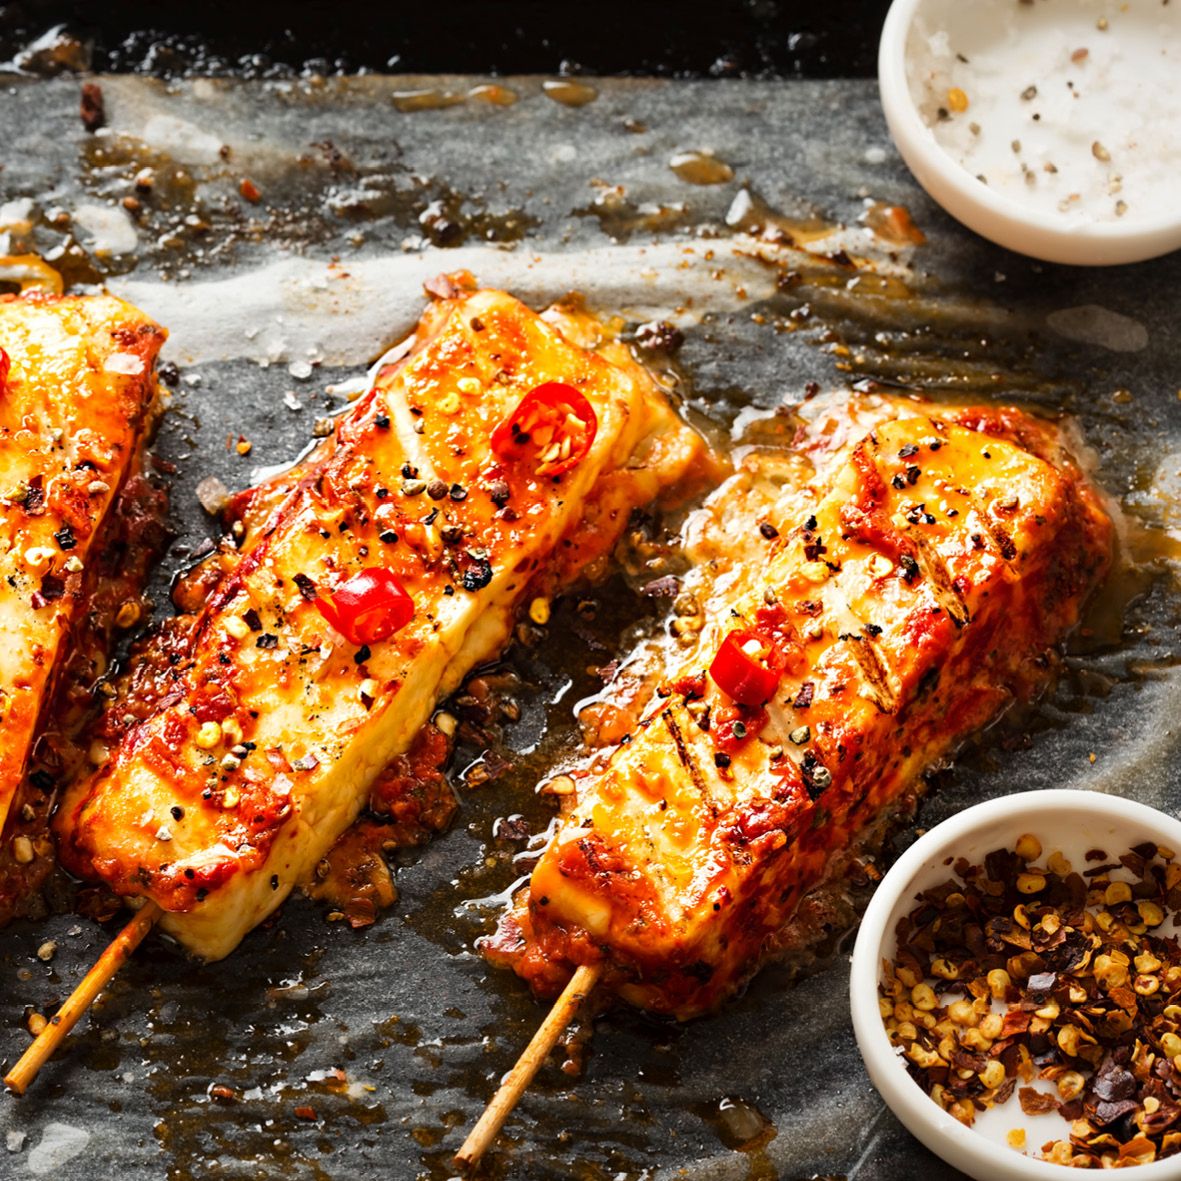 Spicy halloumi skewers with chilli.jpg